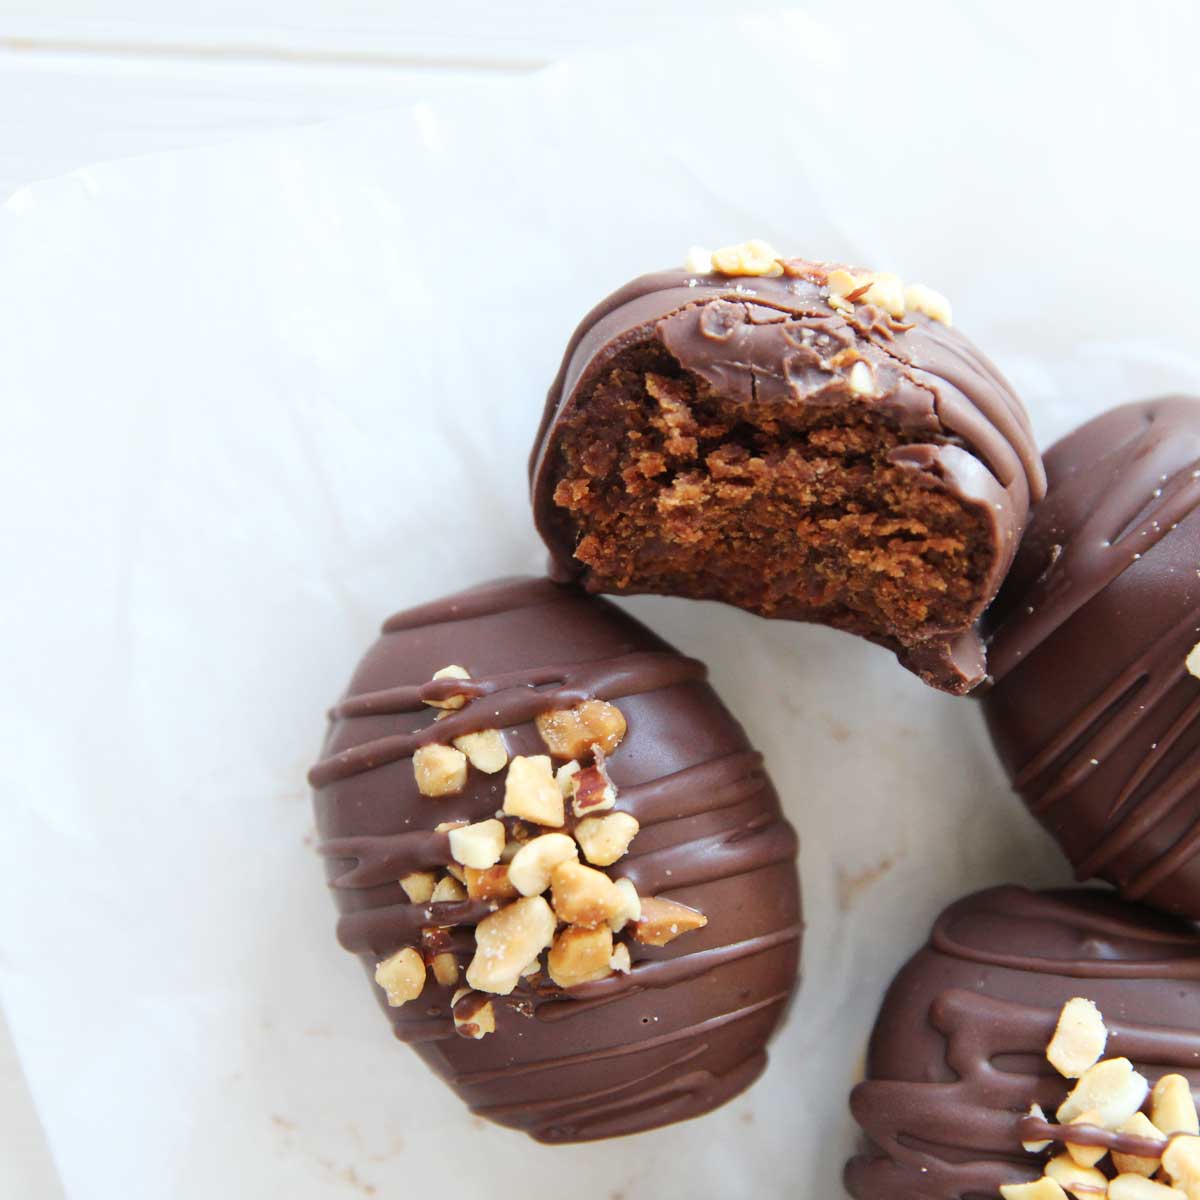 Healthier Nutella Chocolate Easter Eggs Made with PB Powder - Ricotta Almond Easter Eggs